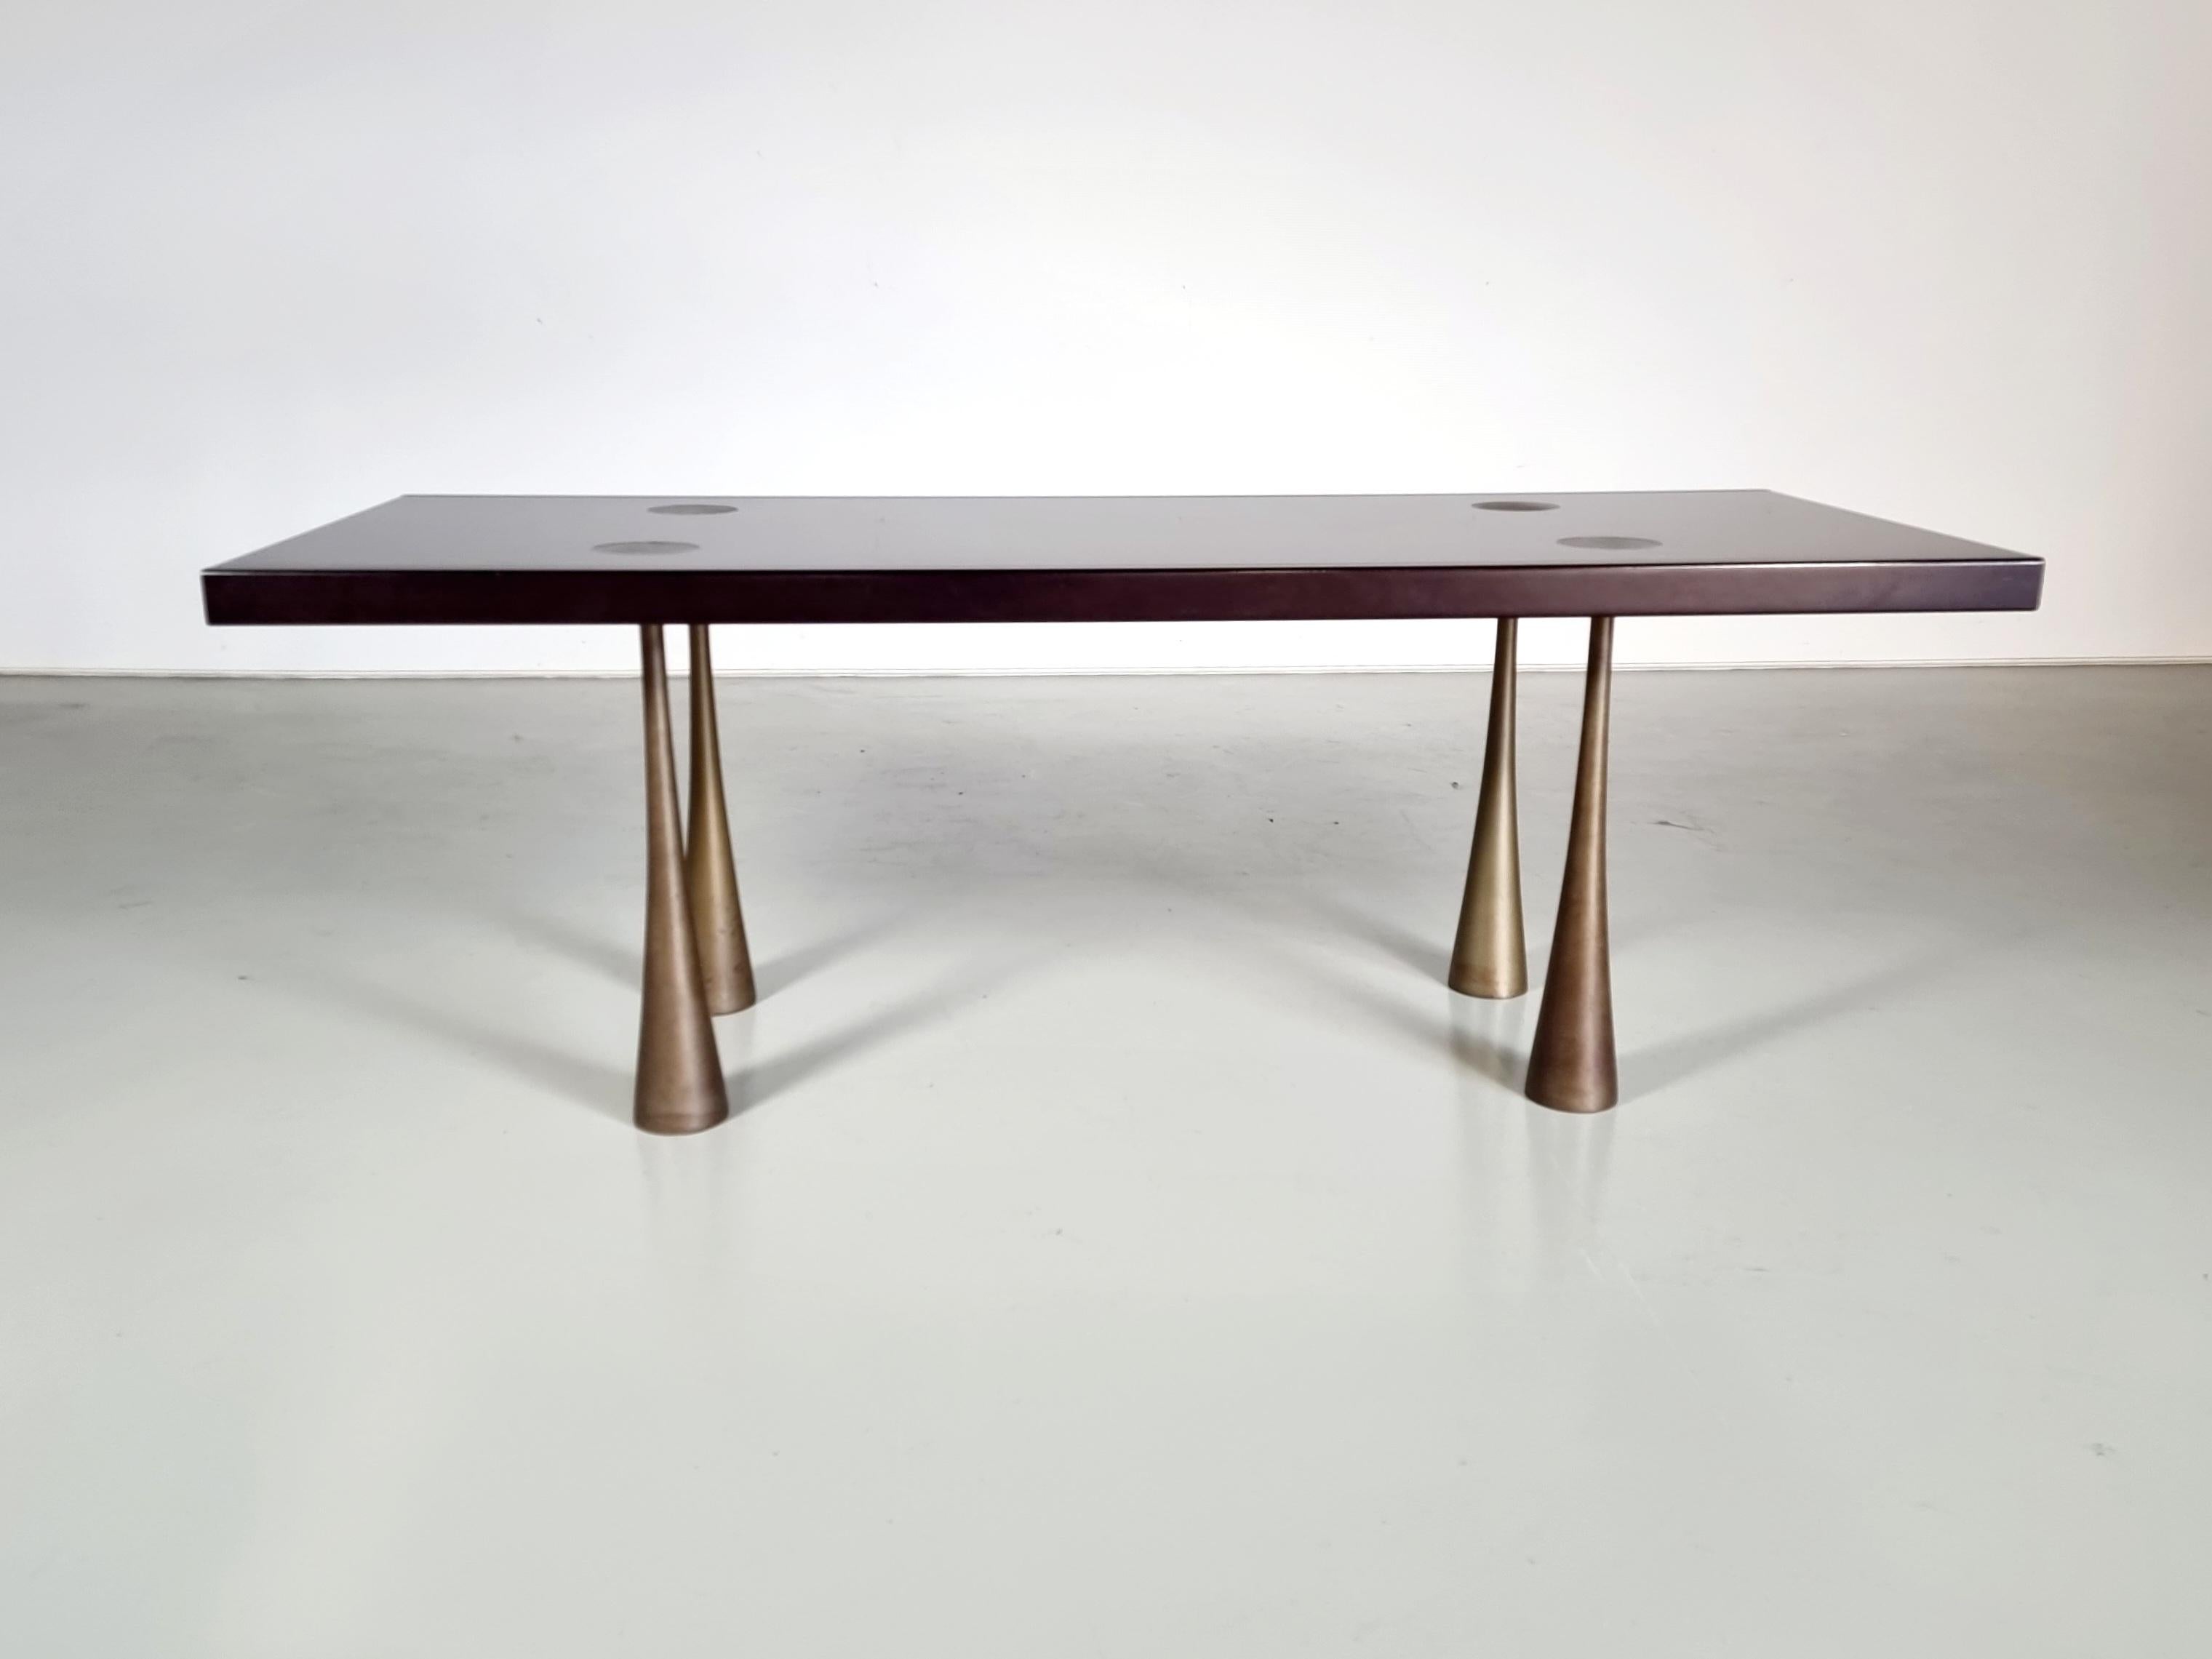 Rare original Angelo Mangiarotti dining table, for La Sorgente Dei Mobili, Italy, 1970s.

The table has four supporting legs, with an elephant's foot shape, so they spread out towards the bottom. They are entirely made of nickel-plated brass. The